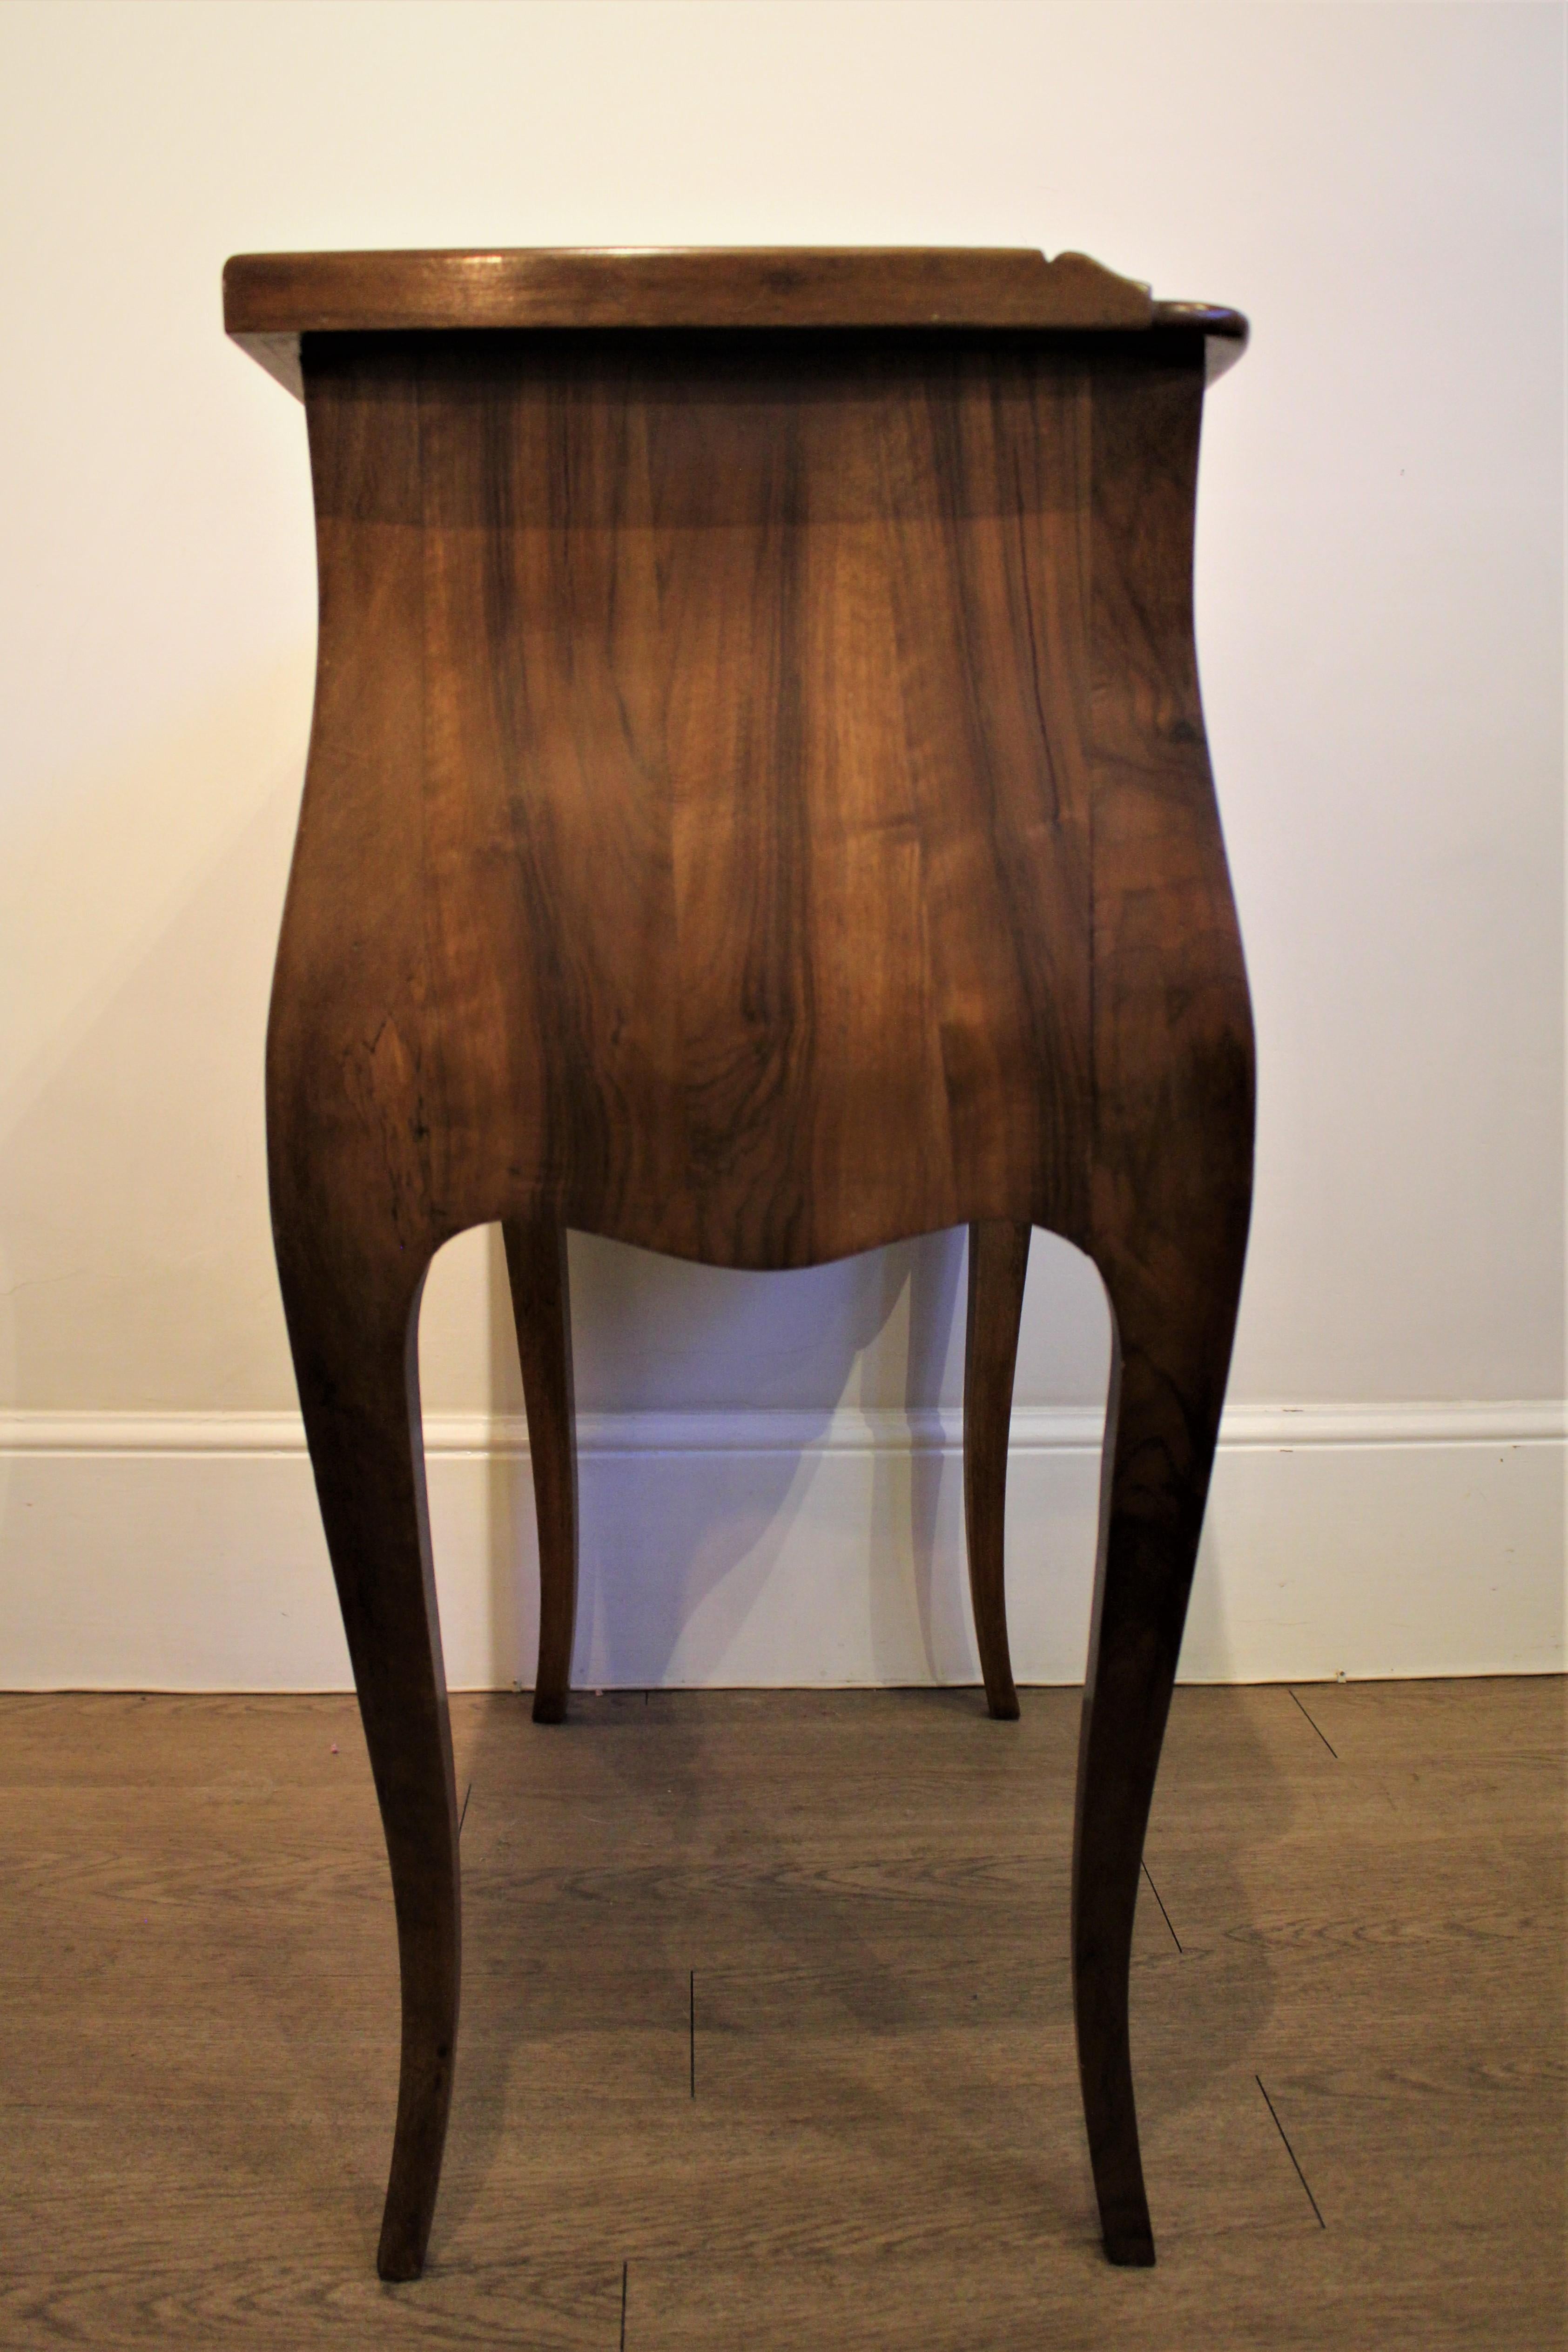 Antique French Walnut Bombe 1920s Commode Bedside Lamp Side Table Music Cabinet In Good Condition For Sale In Dorking, Surrey